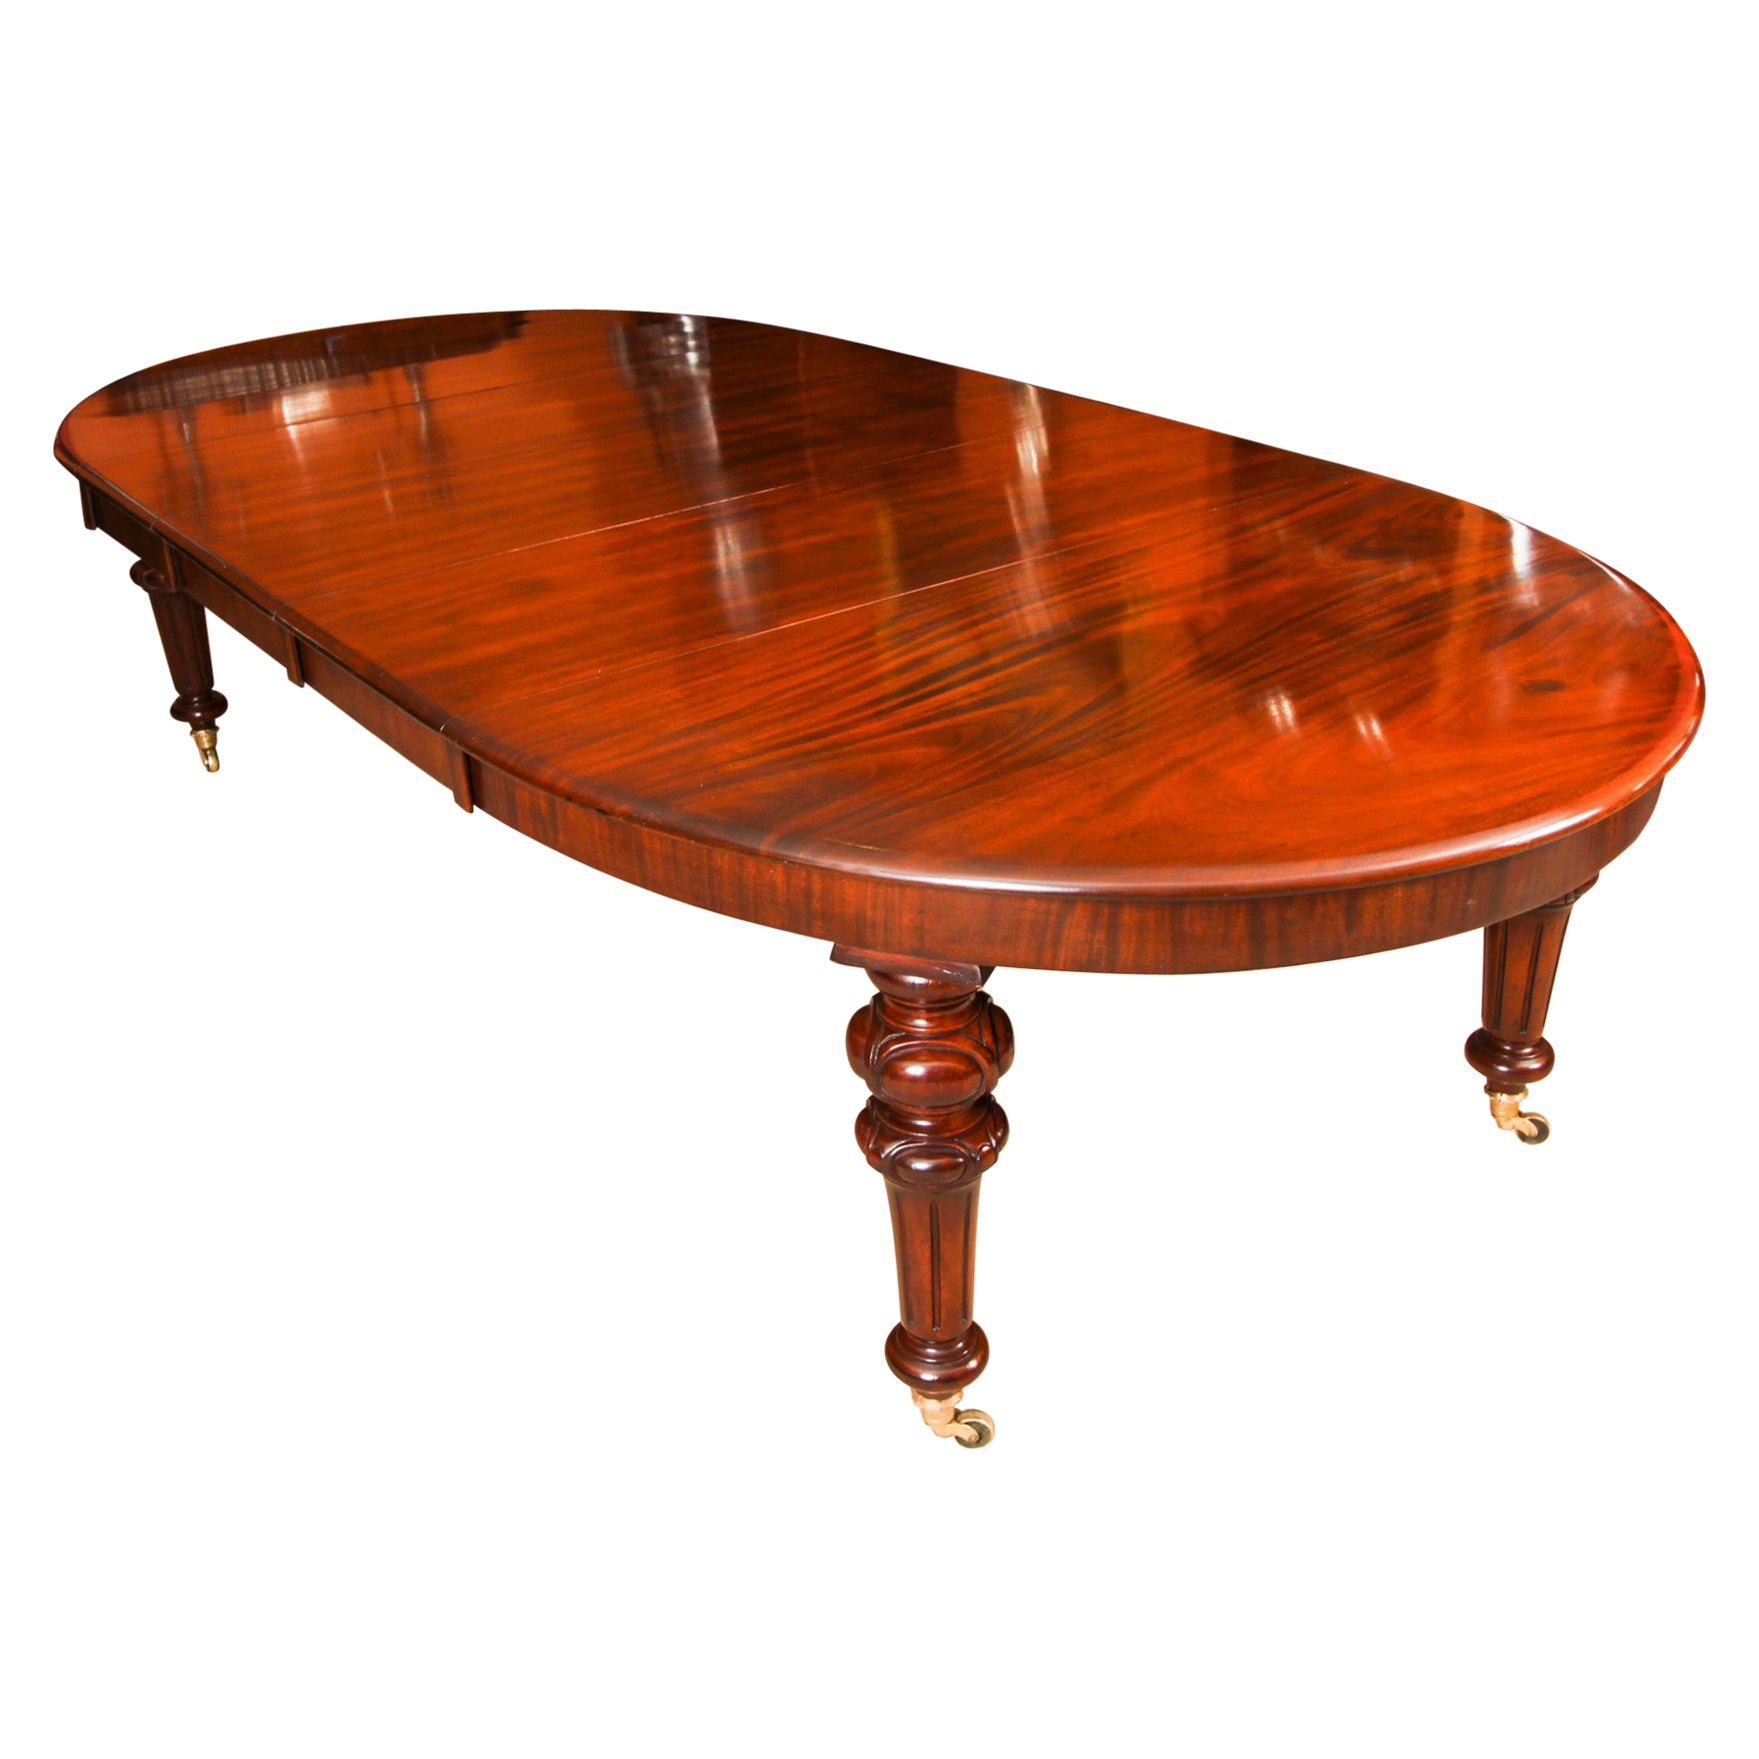 Antique Victorian Oval Flame Mahogany Extending Dining Table 19thC